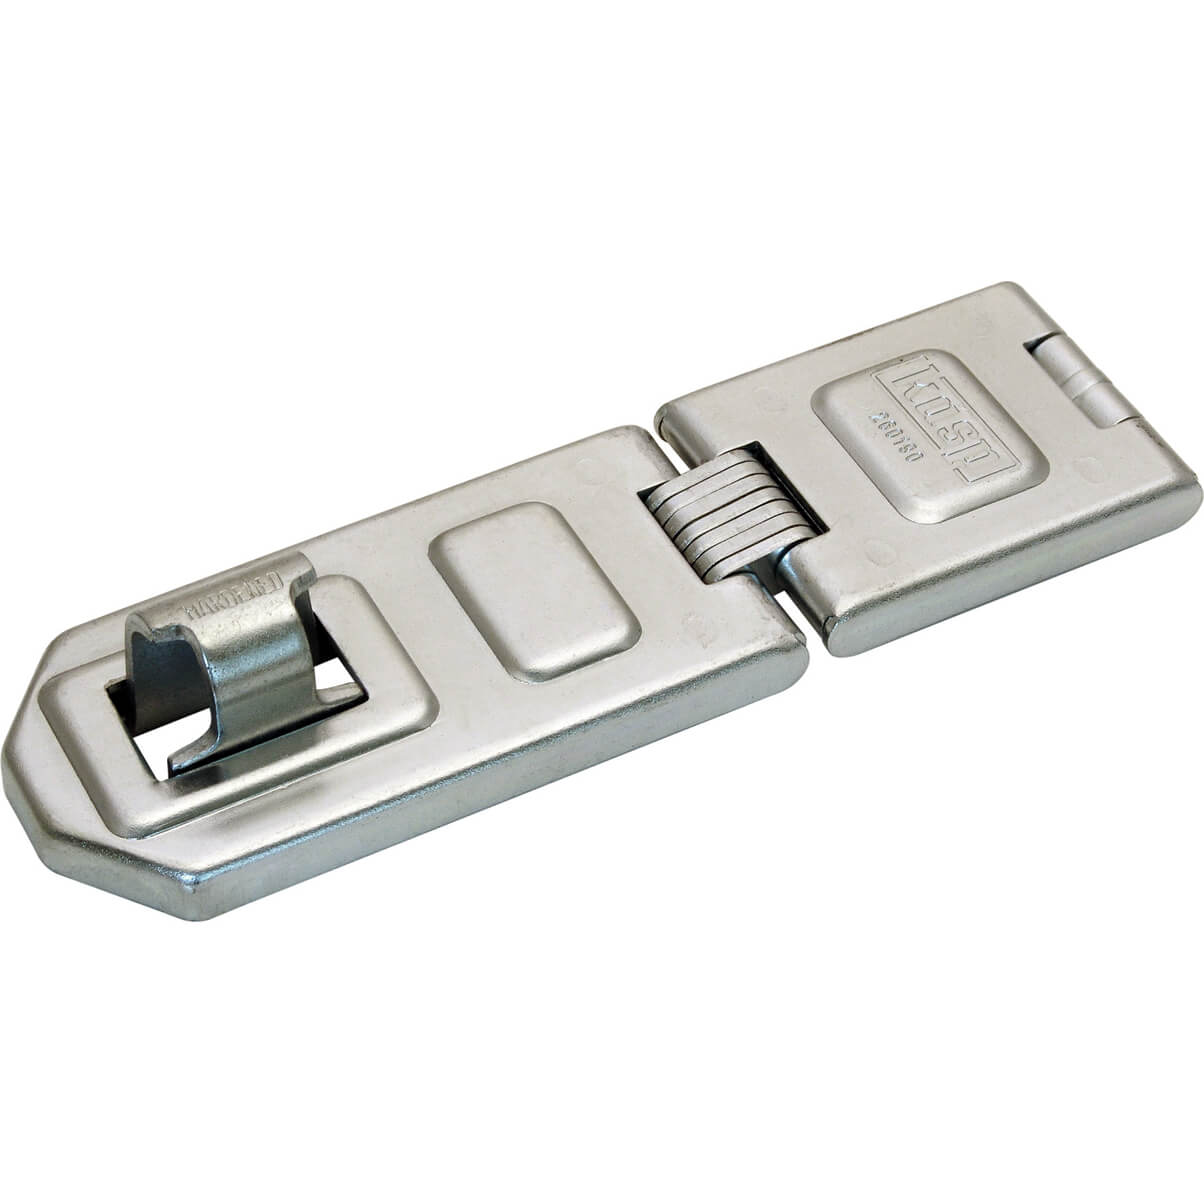 Image of Kasp 260 Series Disc Hasp and Staple 190mm